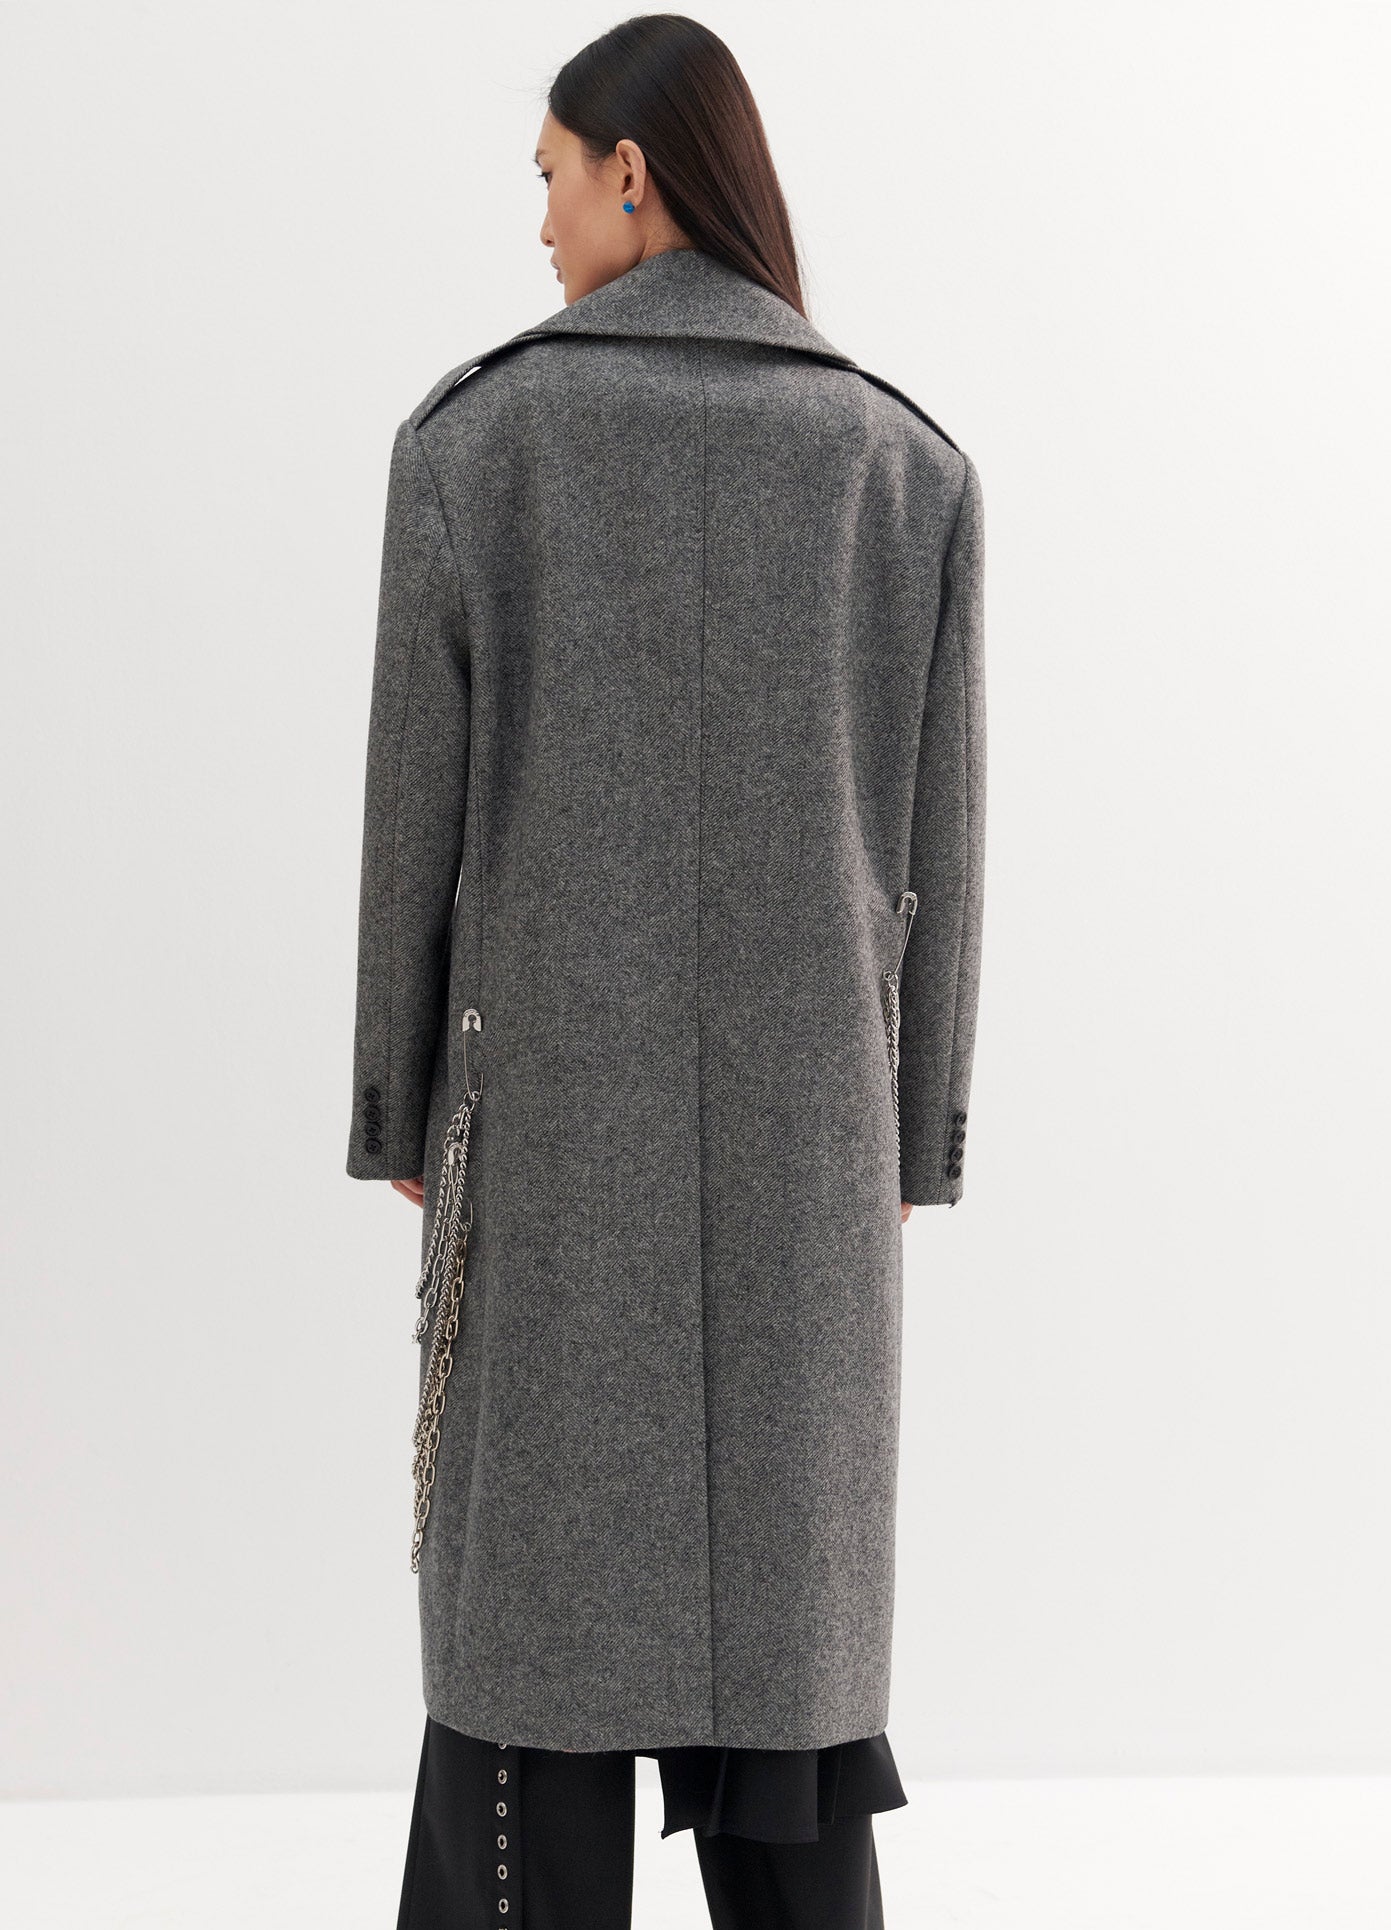 MONSE Chain Detail Coat in Charcoal on Model Back View